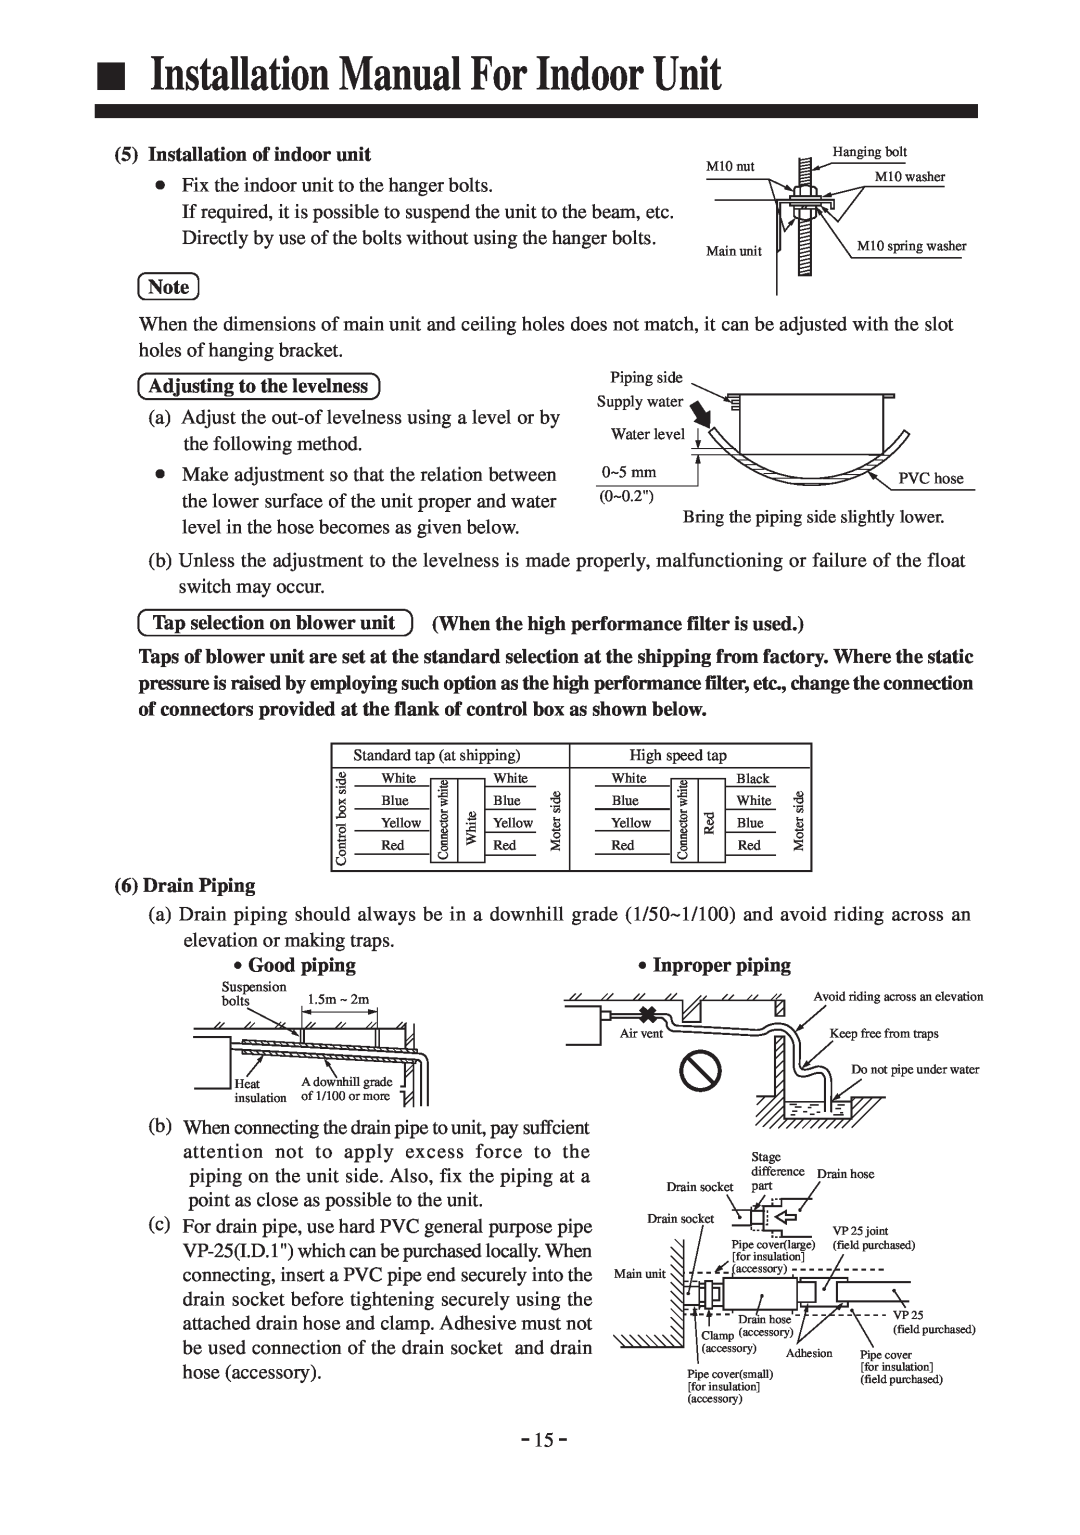 Haier AD36NAMBEA Installation Manual For Indoor Unit, Installation of indoor unit, Adjusting to the levelness, Good piping 